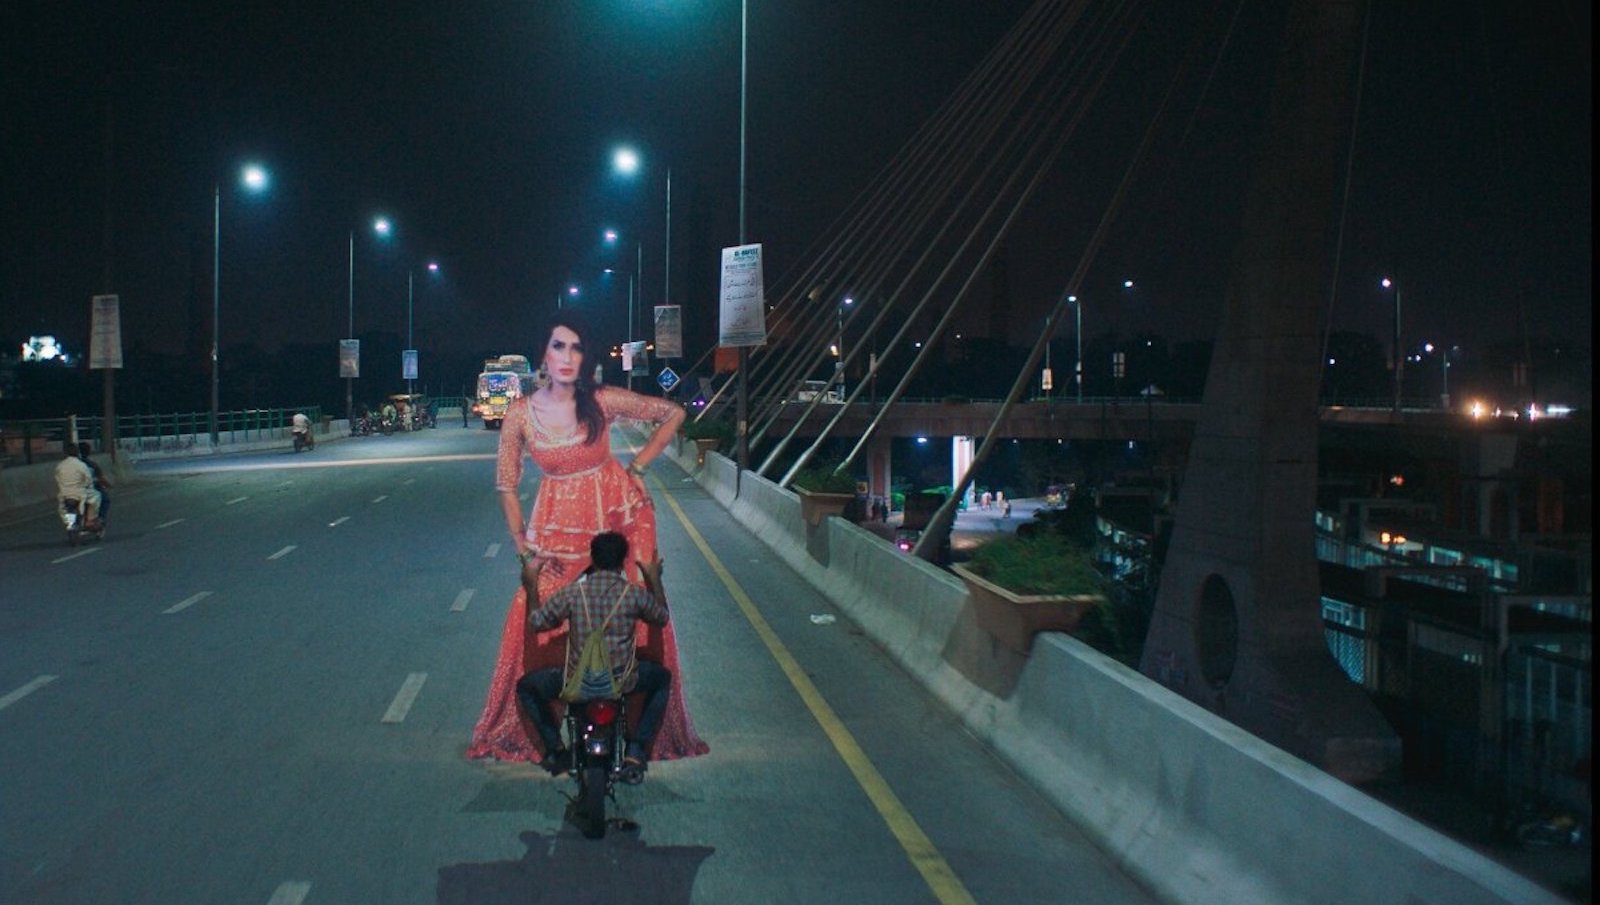 A man on a motorcycle rides across a bridge carrying a large cardboard cutout of a woman dressed in pink